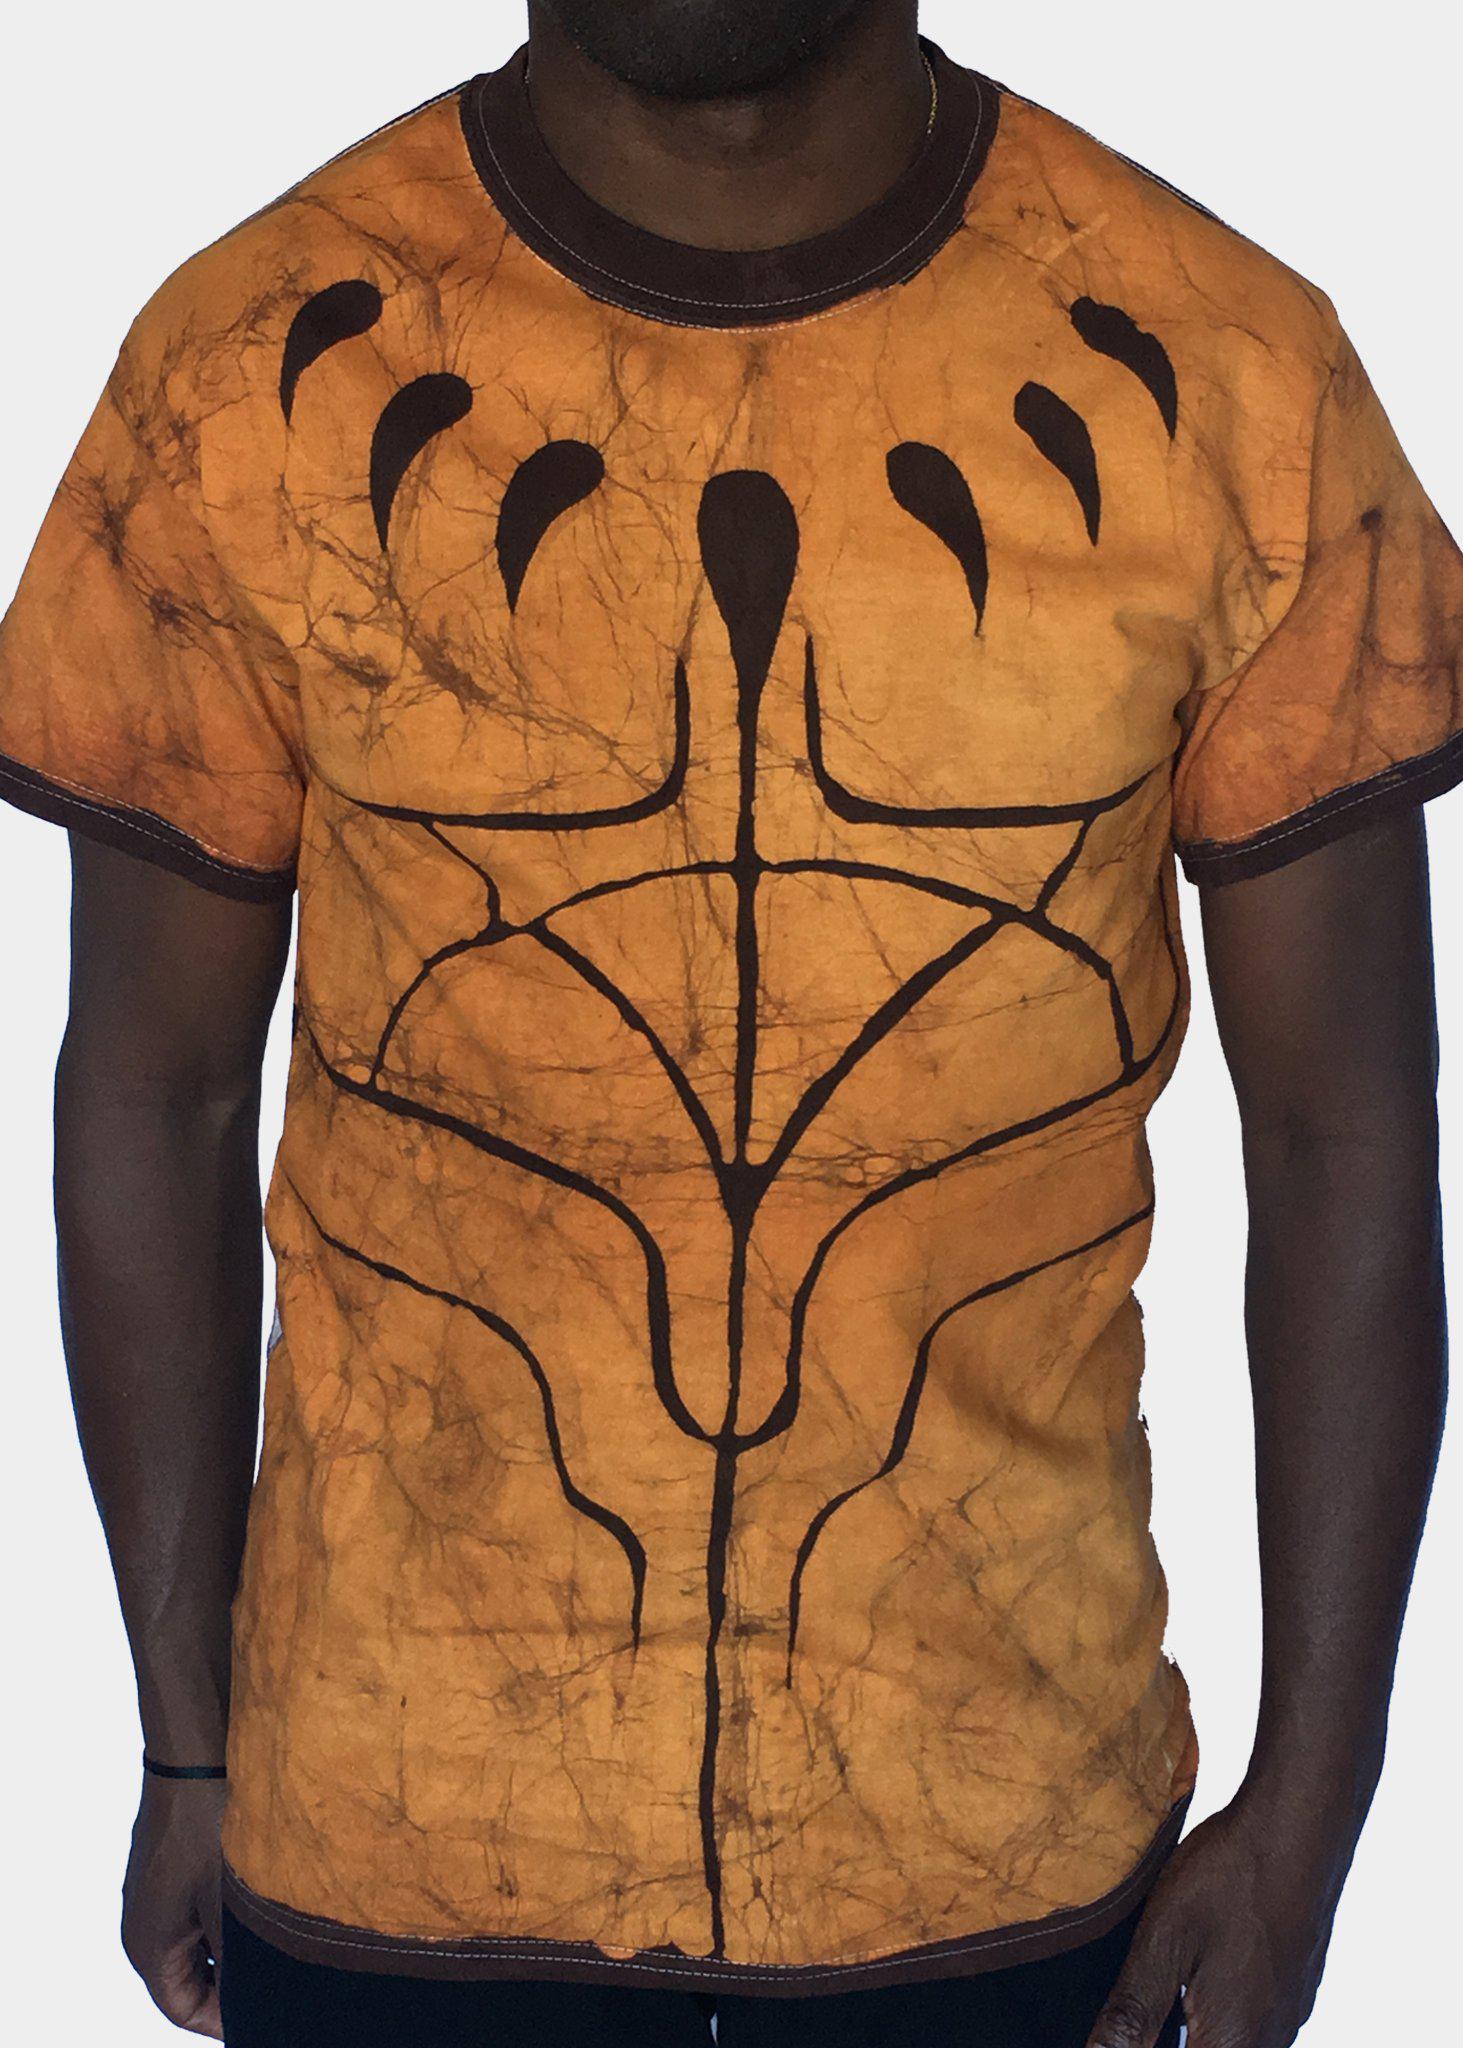 Gold and Brown Short Sleeve Batik T-shirt with Black Panther Claws-Contemporary and Colorful Ensemble-African apparel and accessories